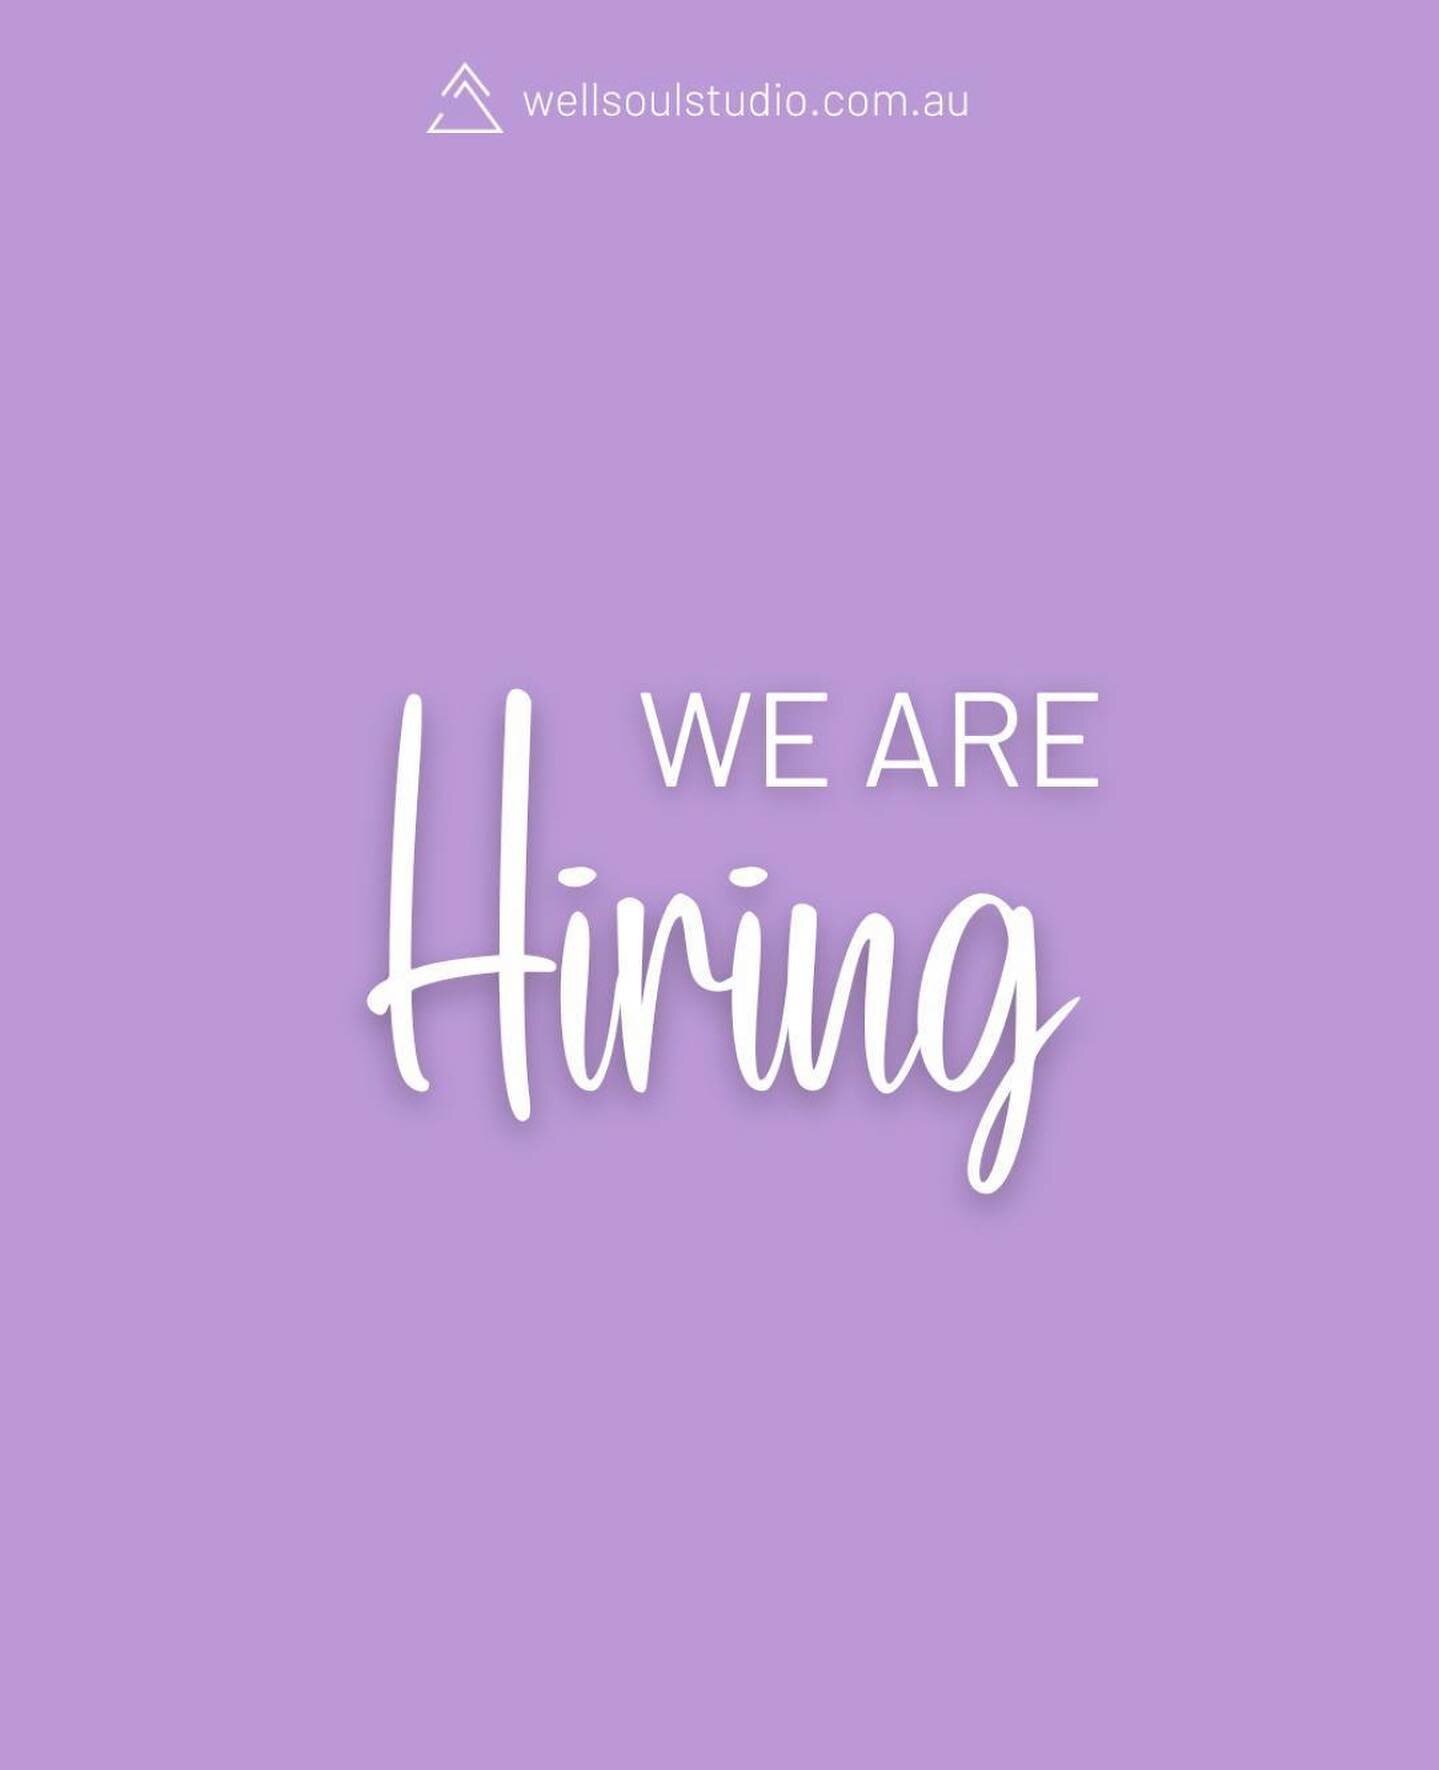 We are hiring 🙌🙌🙌

We are looking for 2 x Chiropractic  Assistants;

✨Position 1 minimum 18 hours a week ✨Position 2 minimum 5 hours a week 

They both have potential to increase in hours for the right person. 
Neither are weekend work. 
(maybe ne